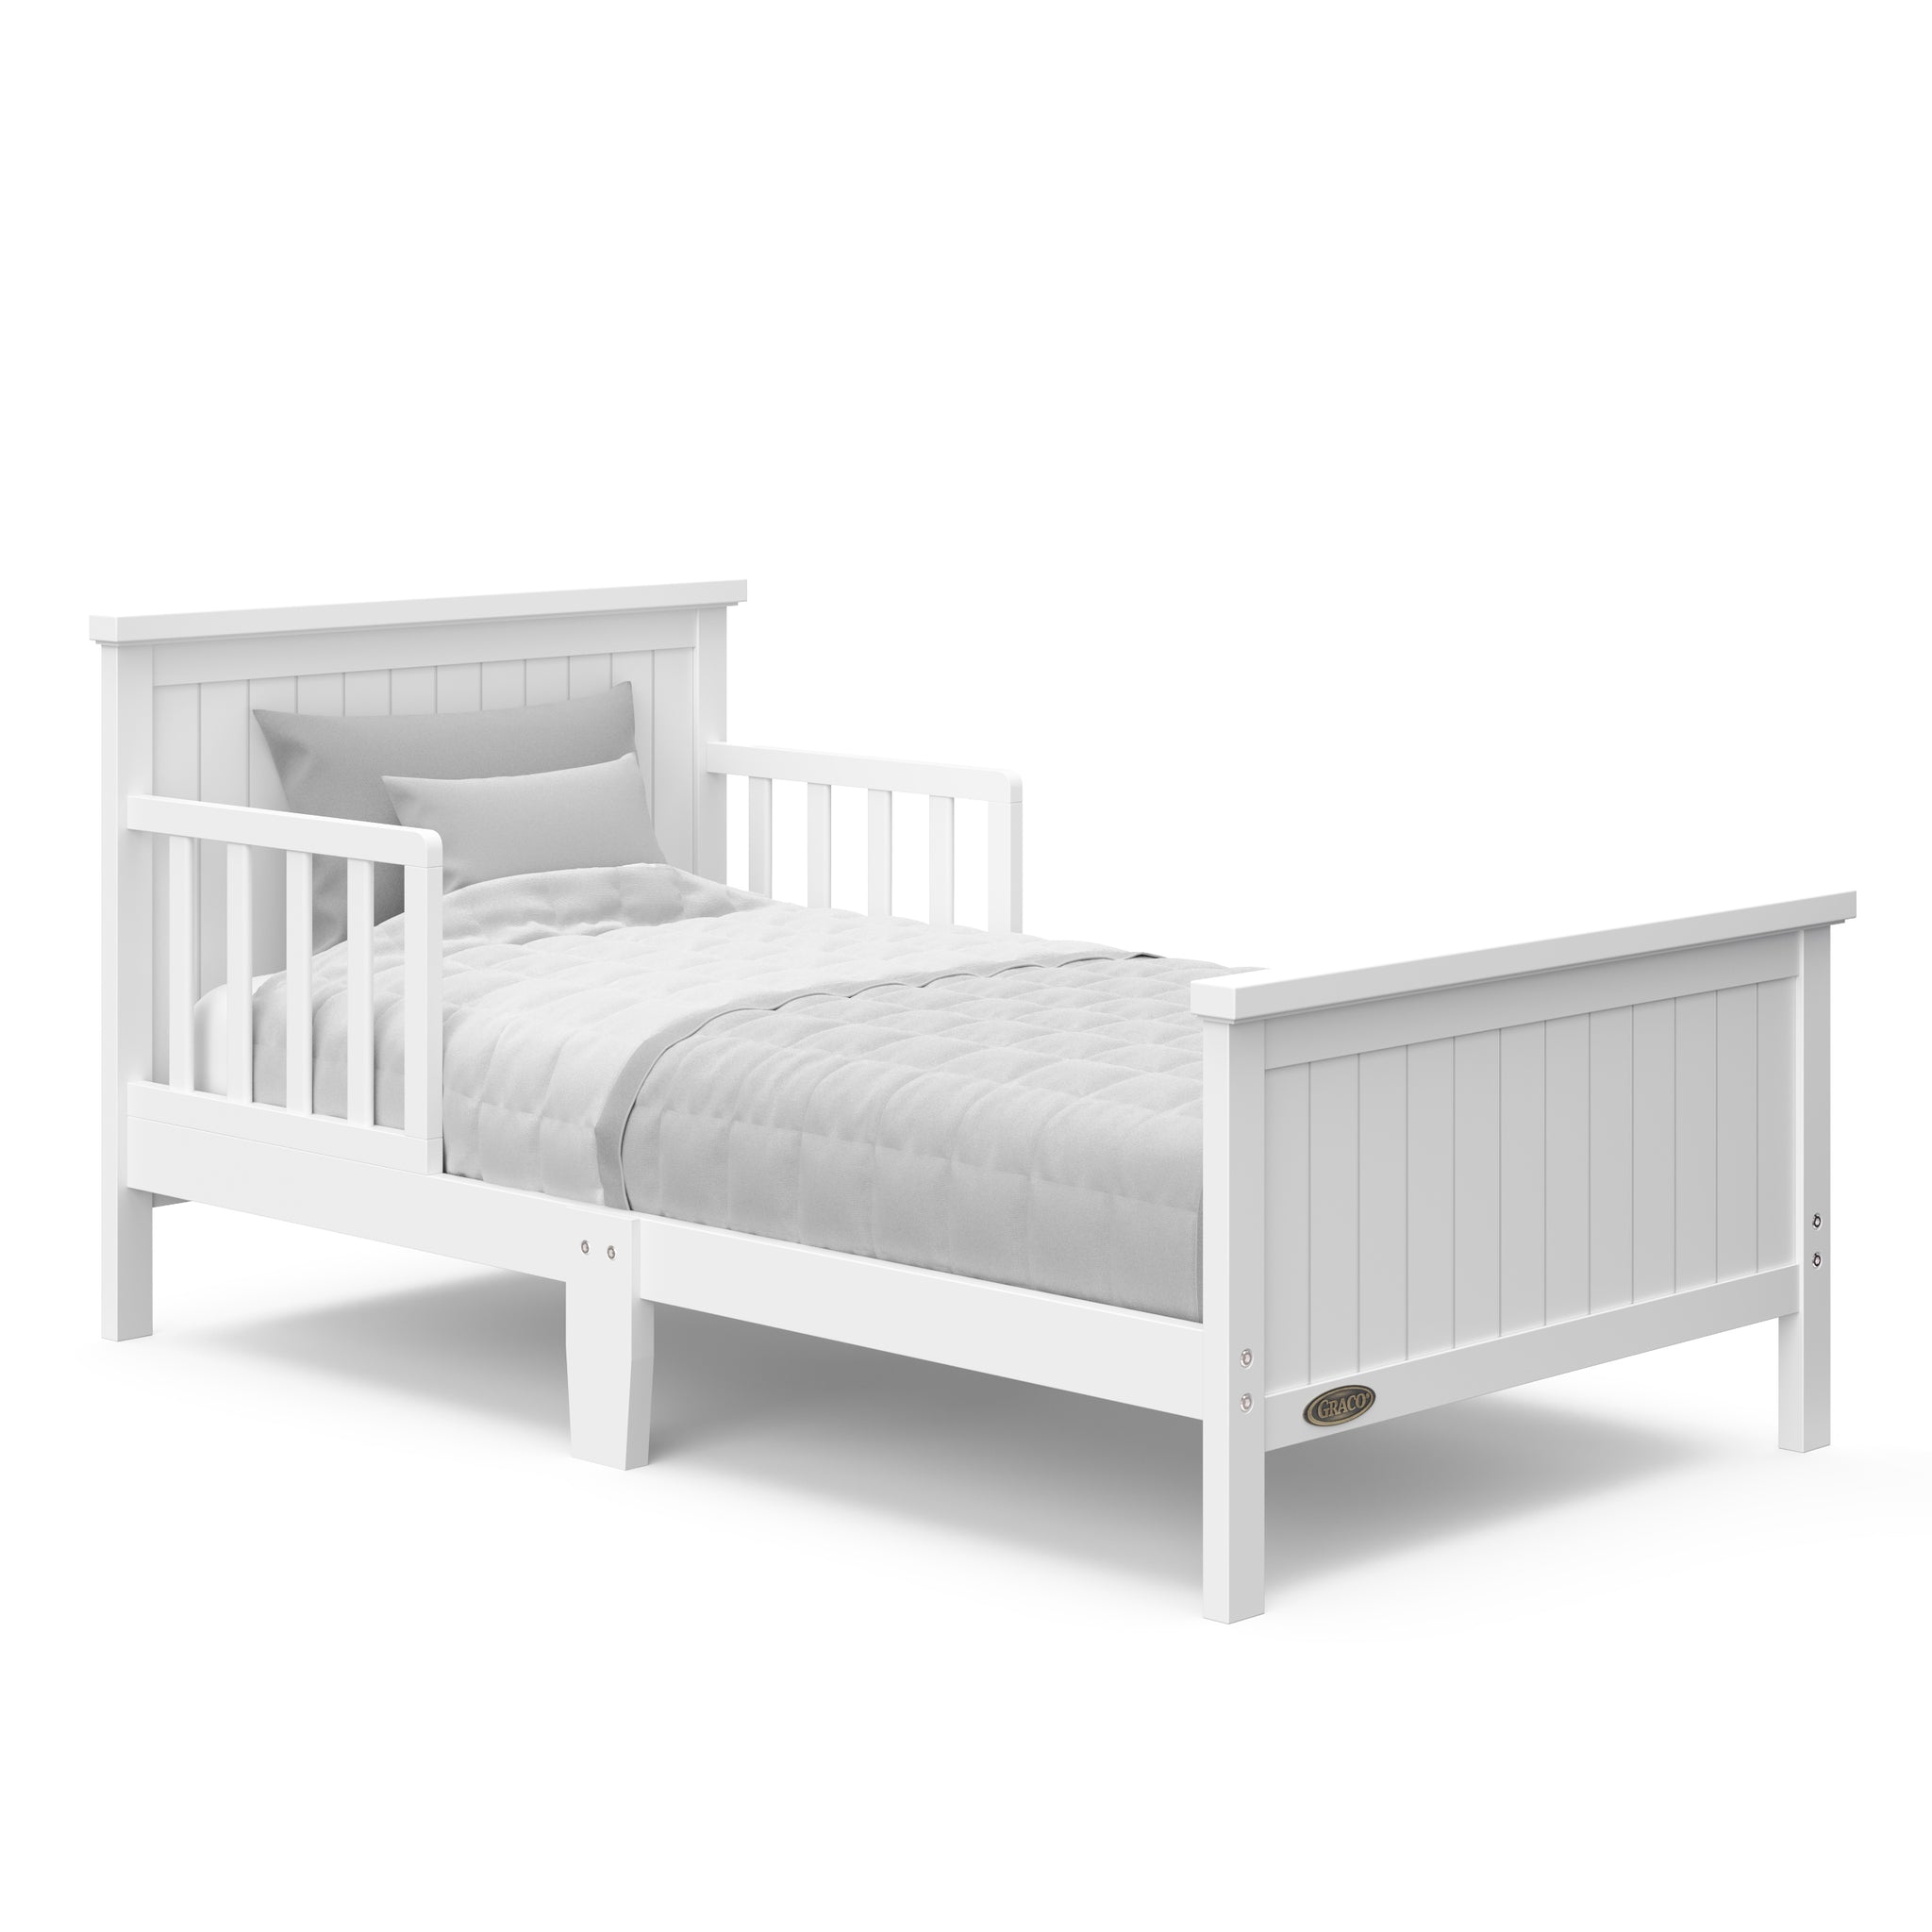 White toddler bed with guardrails angled with bedding